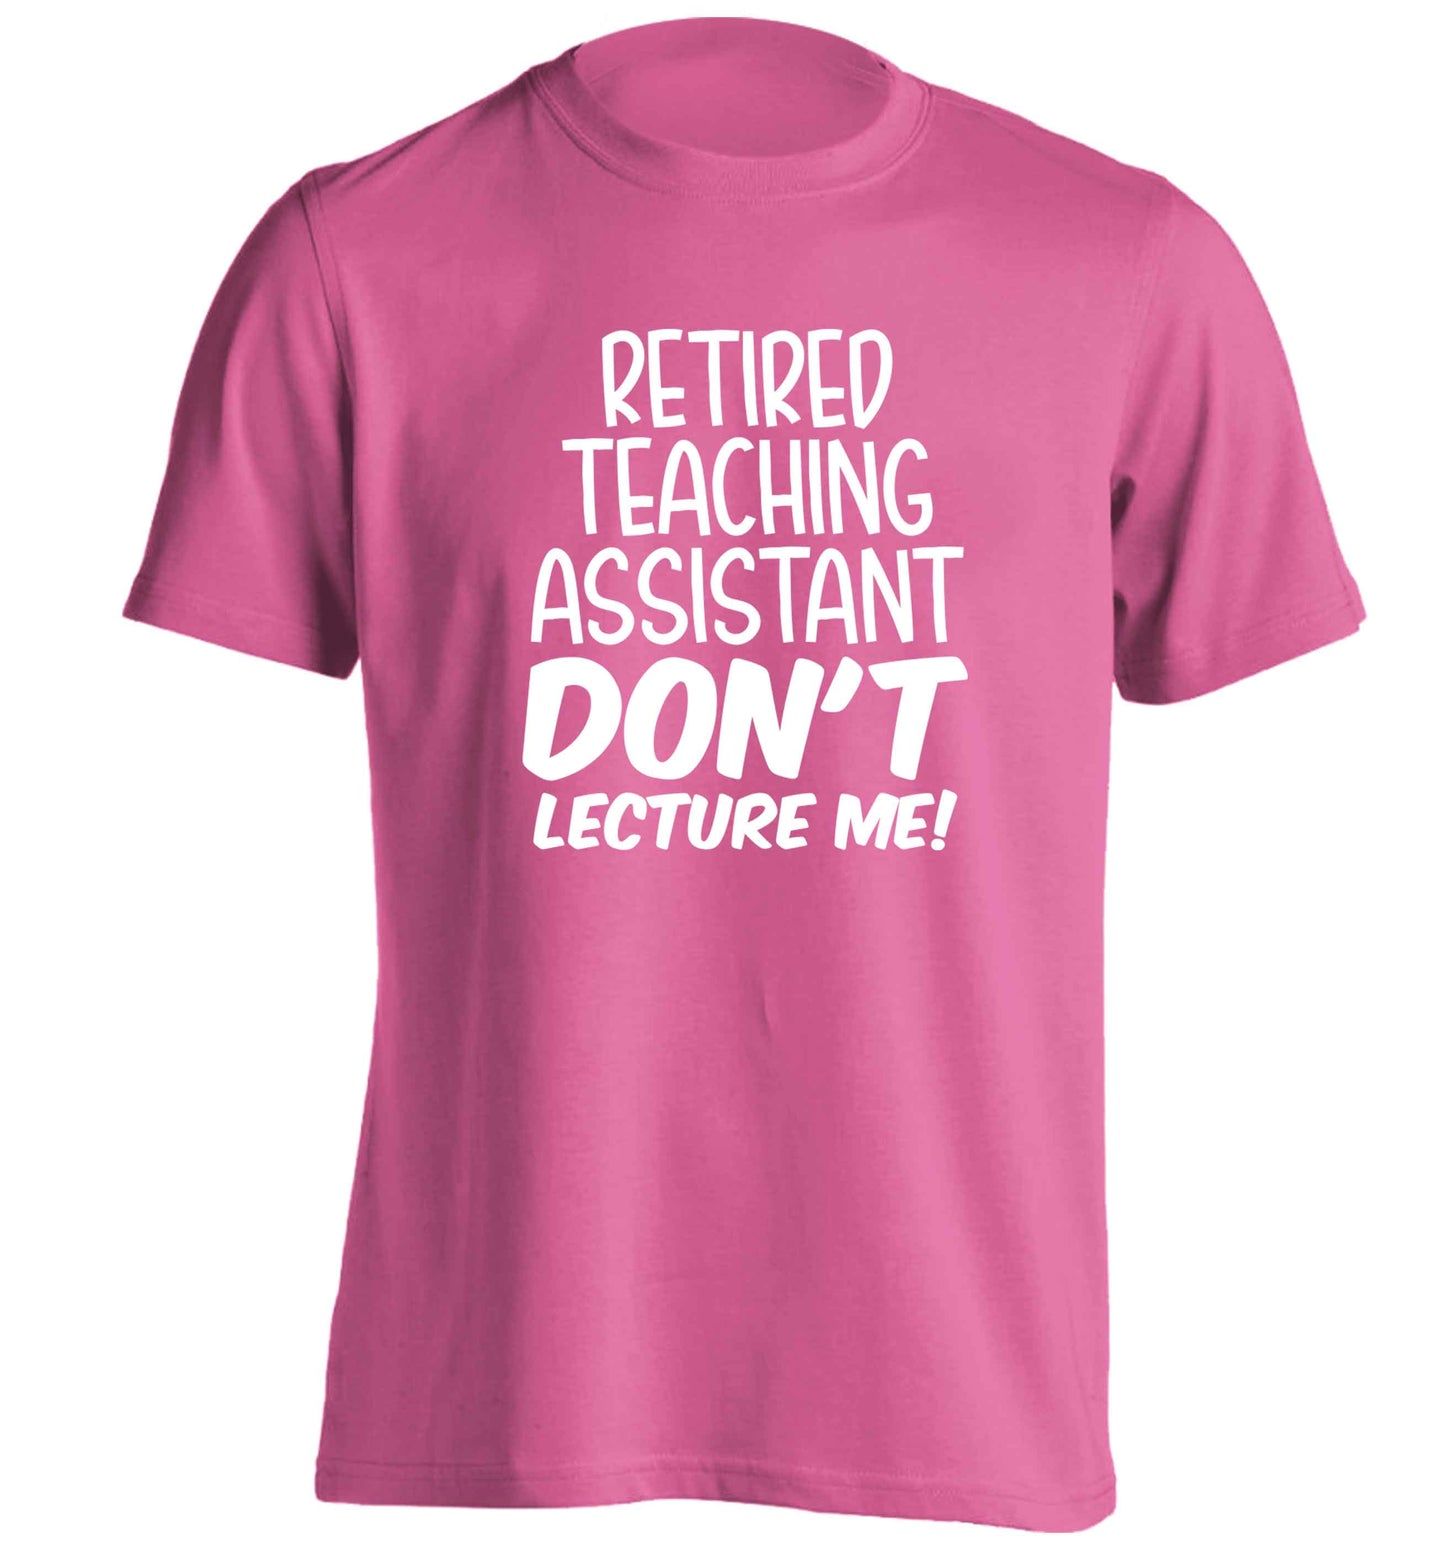 Retired teaching assistant don't lecture me adults unisex pink Tshirt 2XL